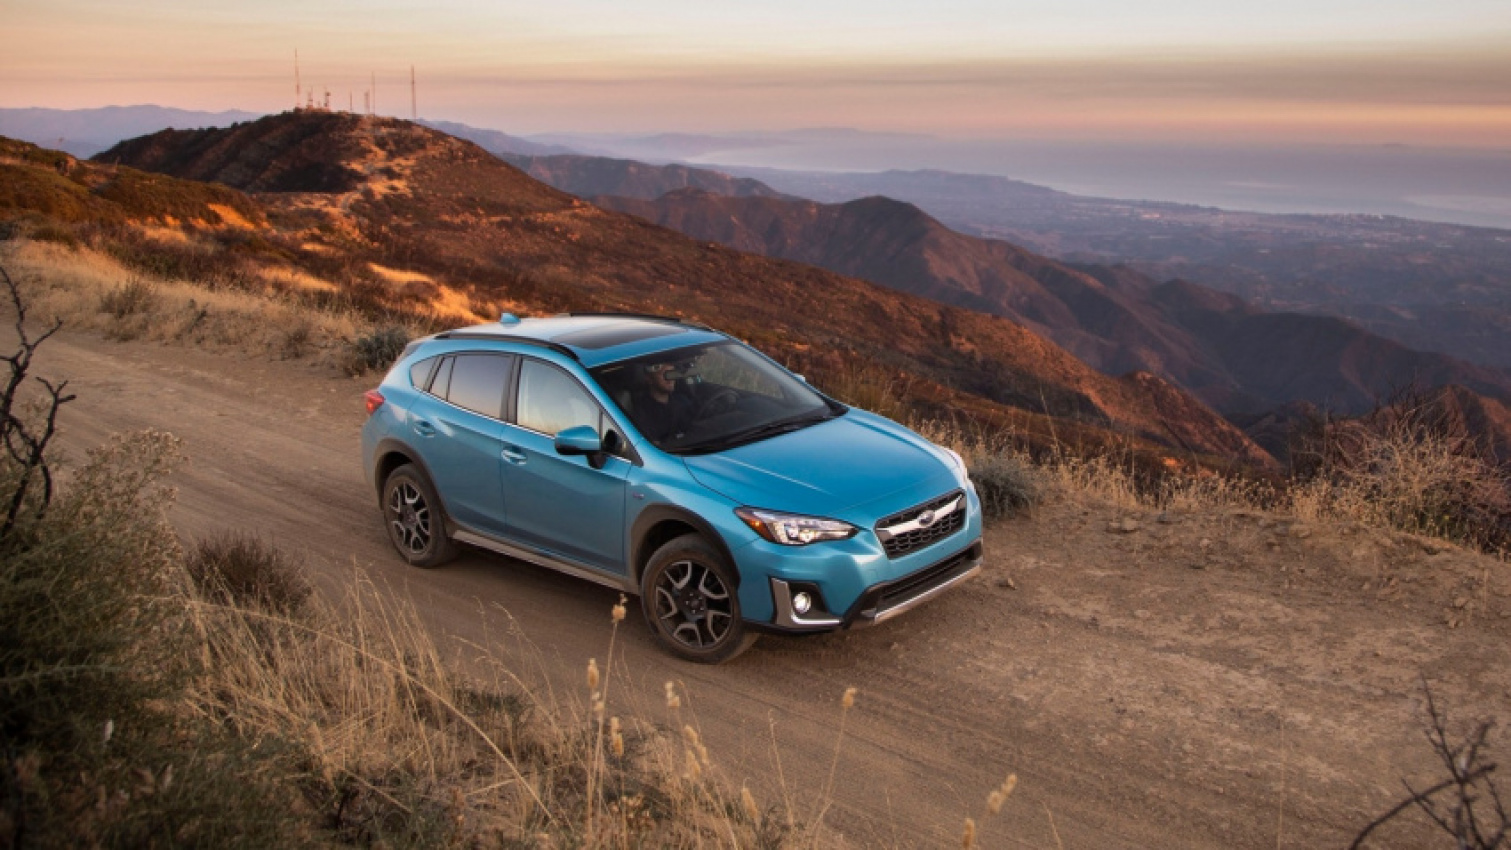 cars, ford, hybrid cars, subaru, android, hybrids, subaru news, android, 2022 subaru crosstrek hybrid still goes 17 miles electric, is unique among affordable plug-in hybrids